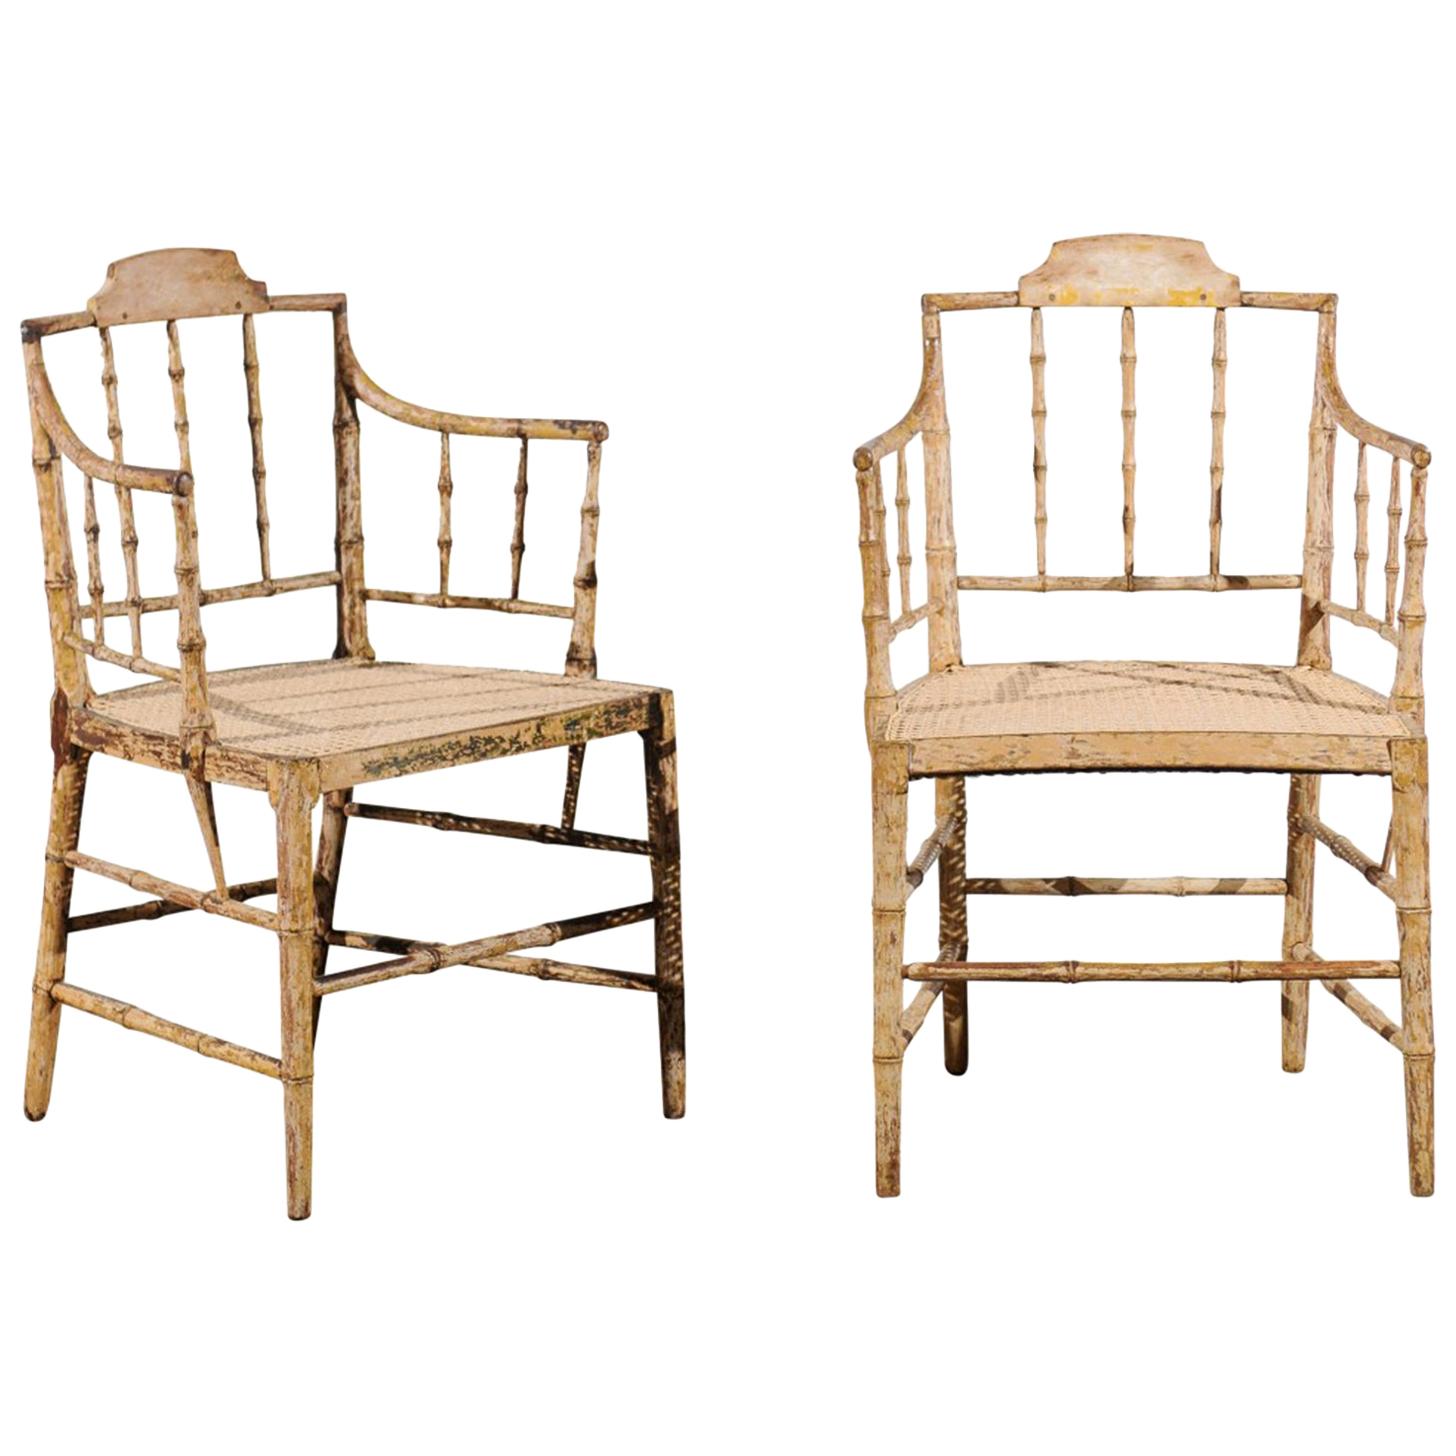 Pair of English Stripped Faux Bamboo Armchairs, New Cane Seats, circa 1830